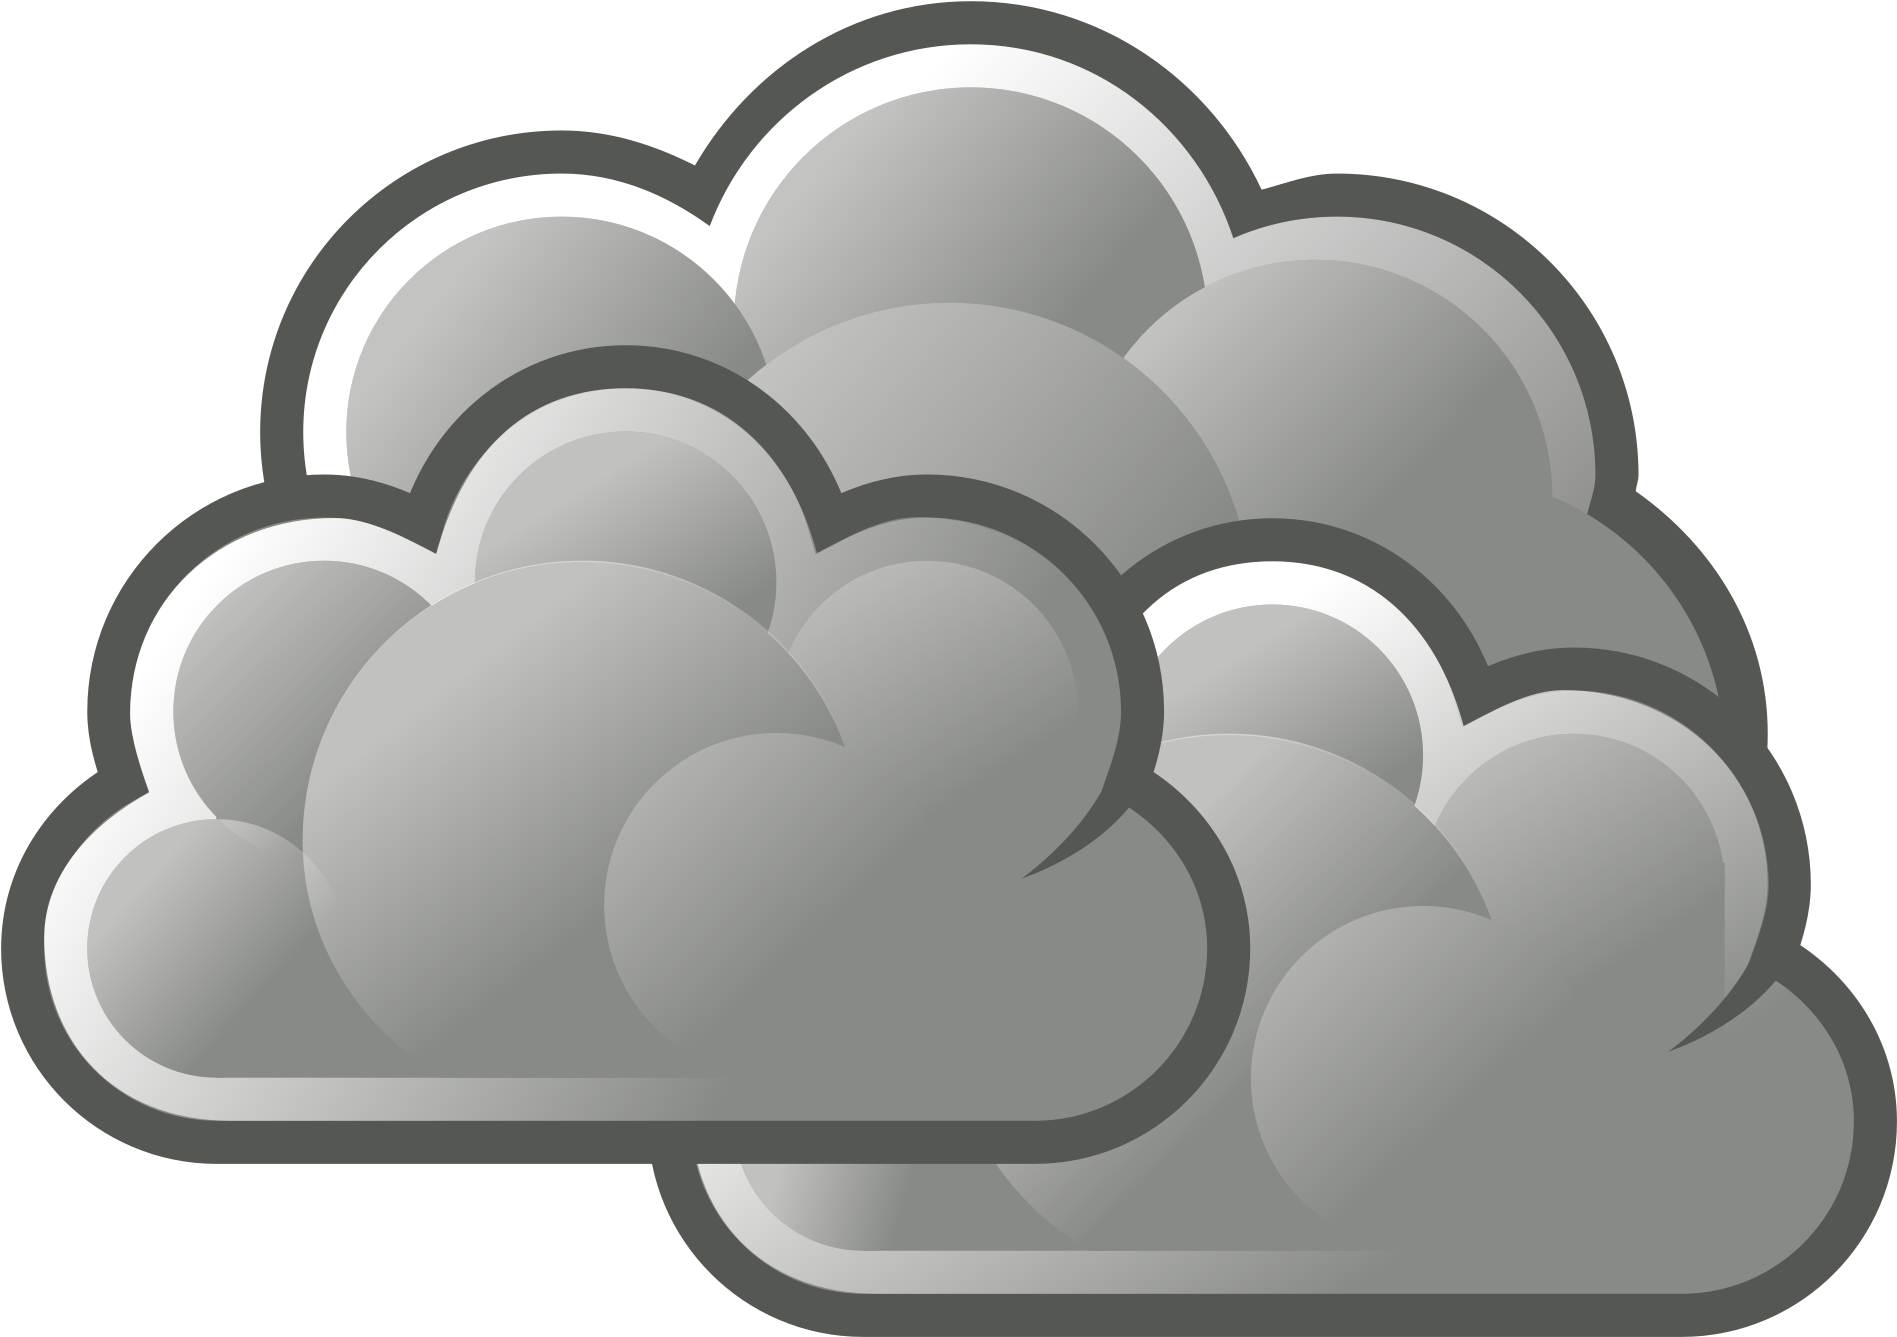 Open - Cloudy Clipart - (2000x2000) Png Clipart Download. 